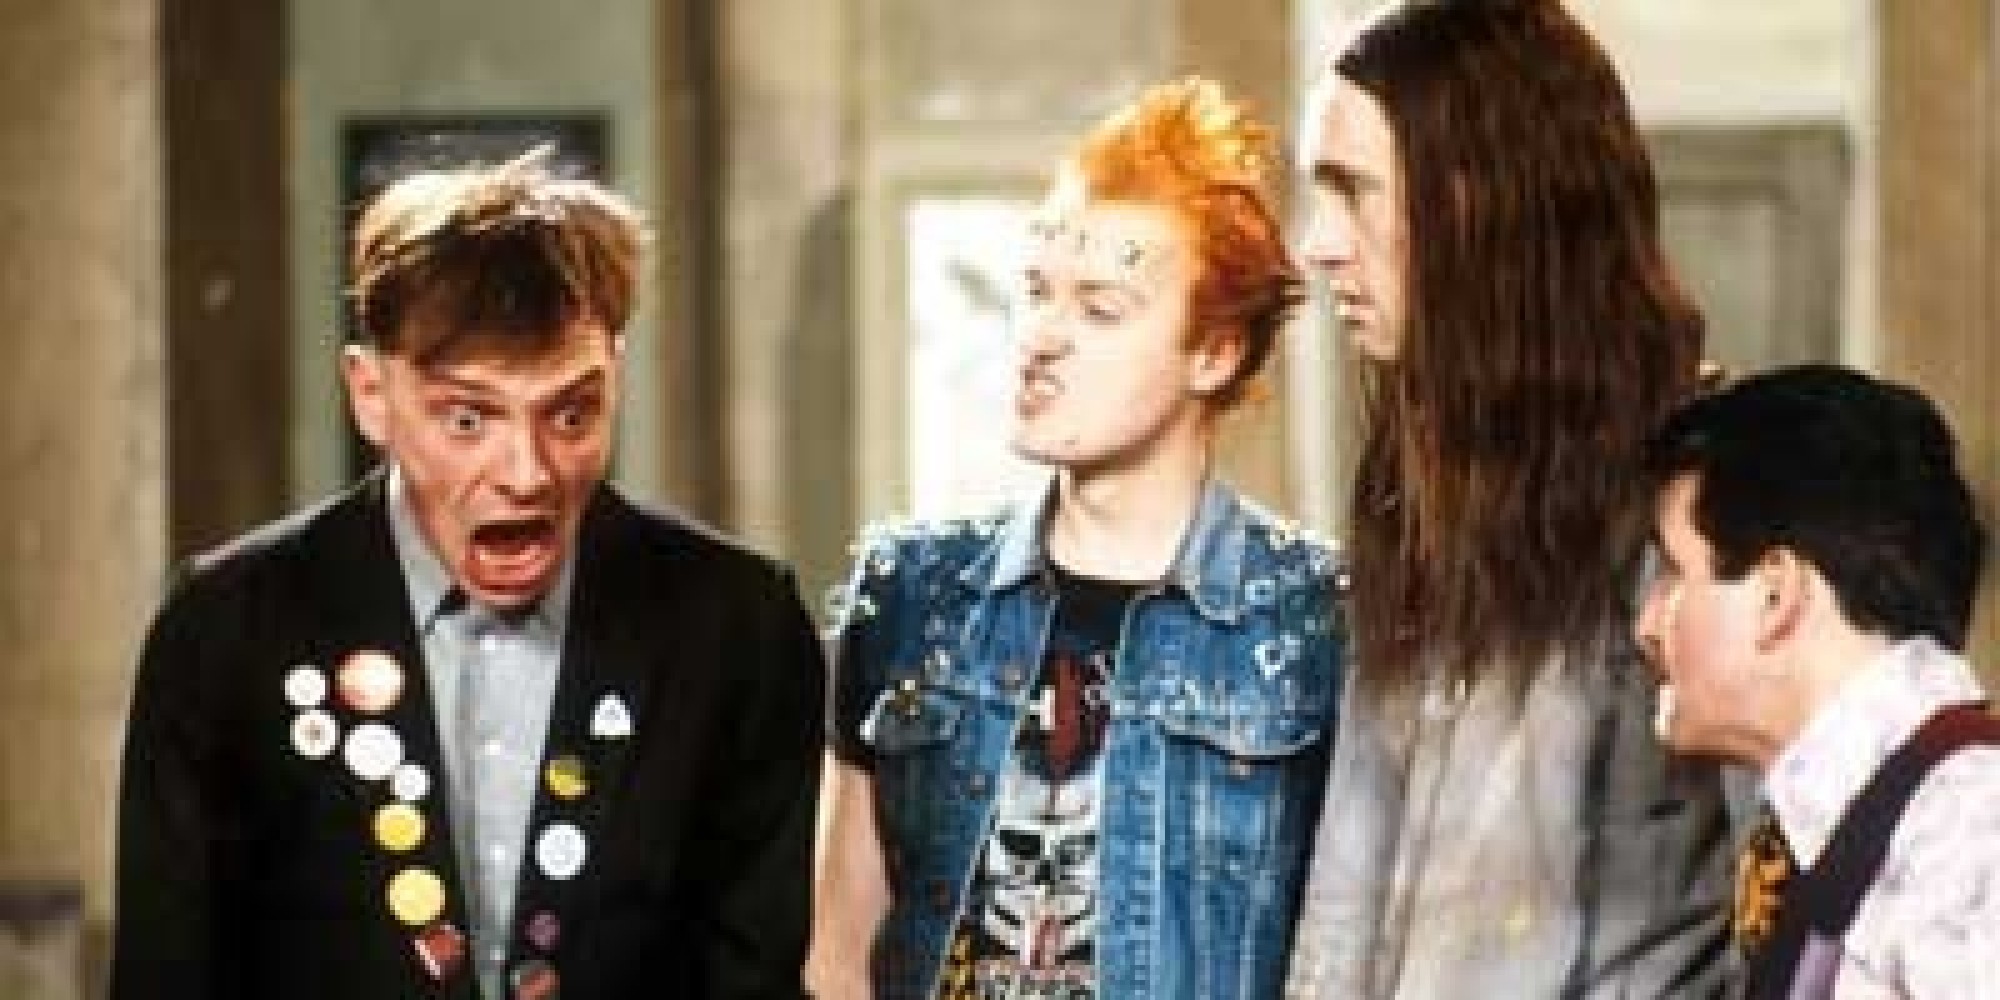 o-THE-YOUNG-ONES-RIK-MAYALL-facebook.jpg